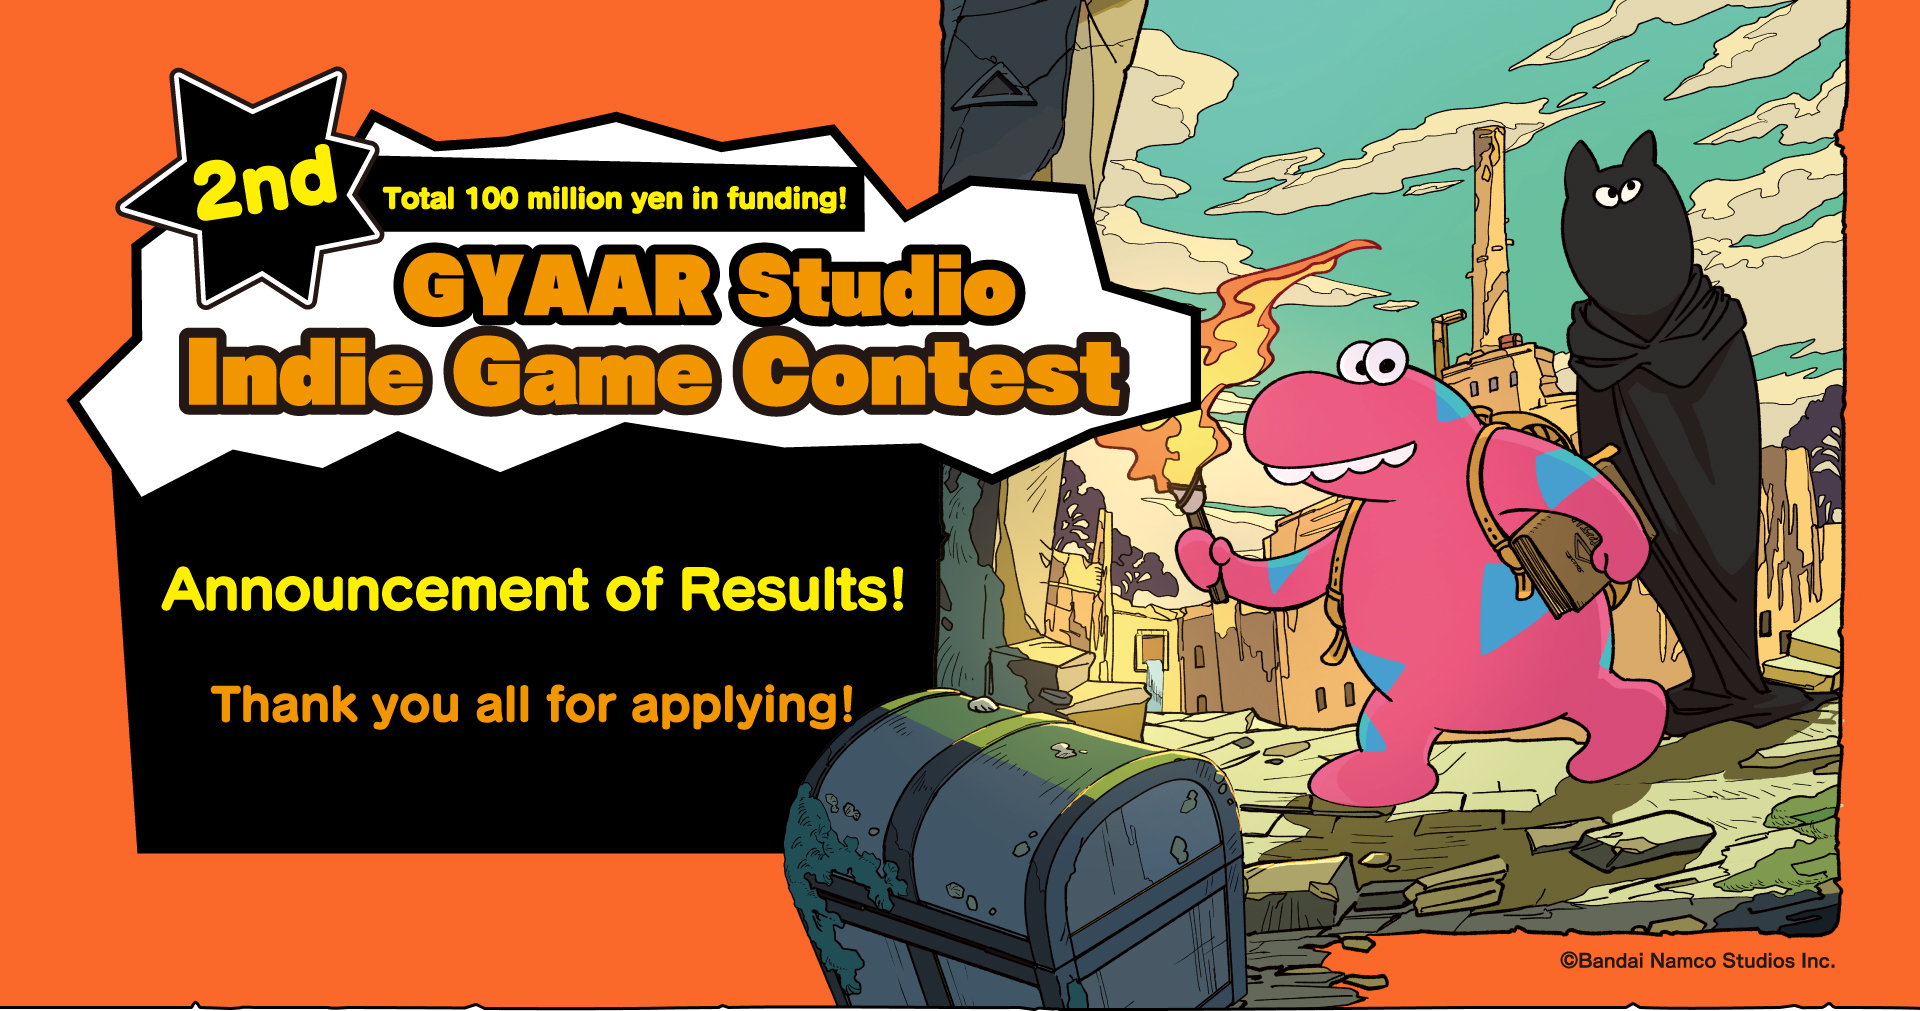 Total 100 million yen in funding! 2nd GYAAR Studio Indie Game Contest. Announcement of Results! Thank you all for applying!